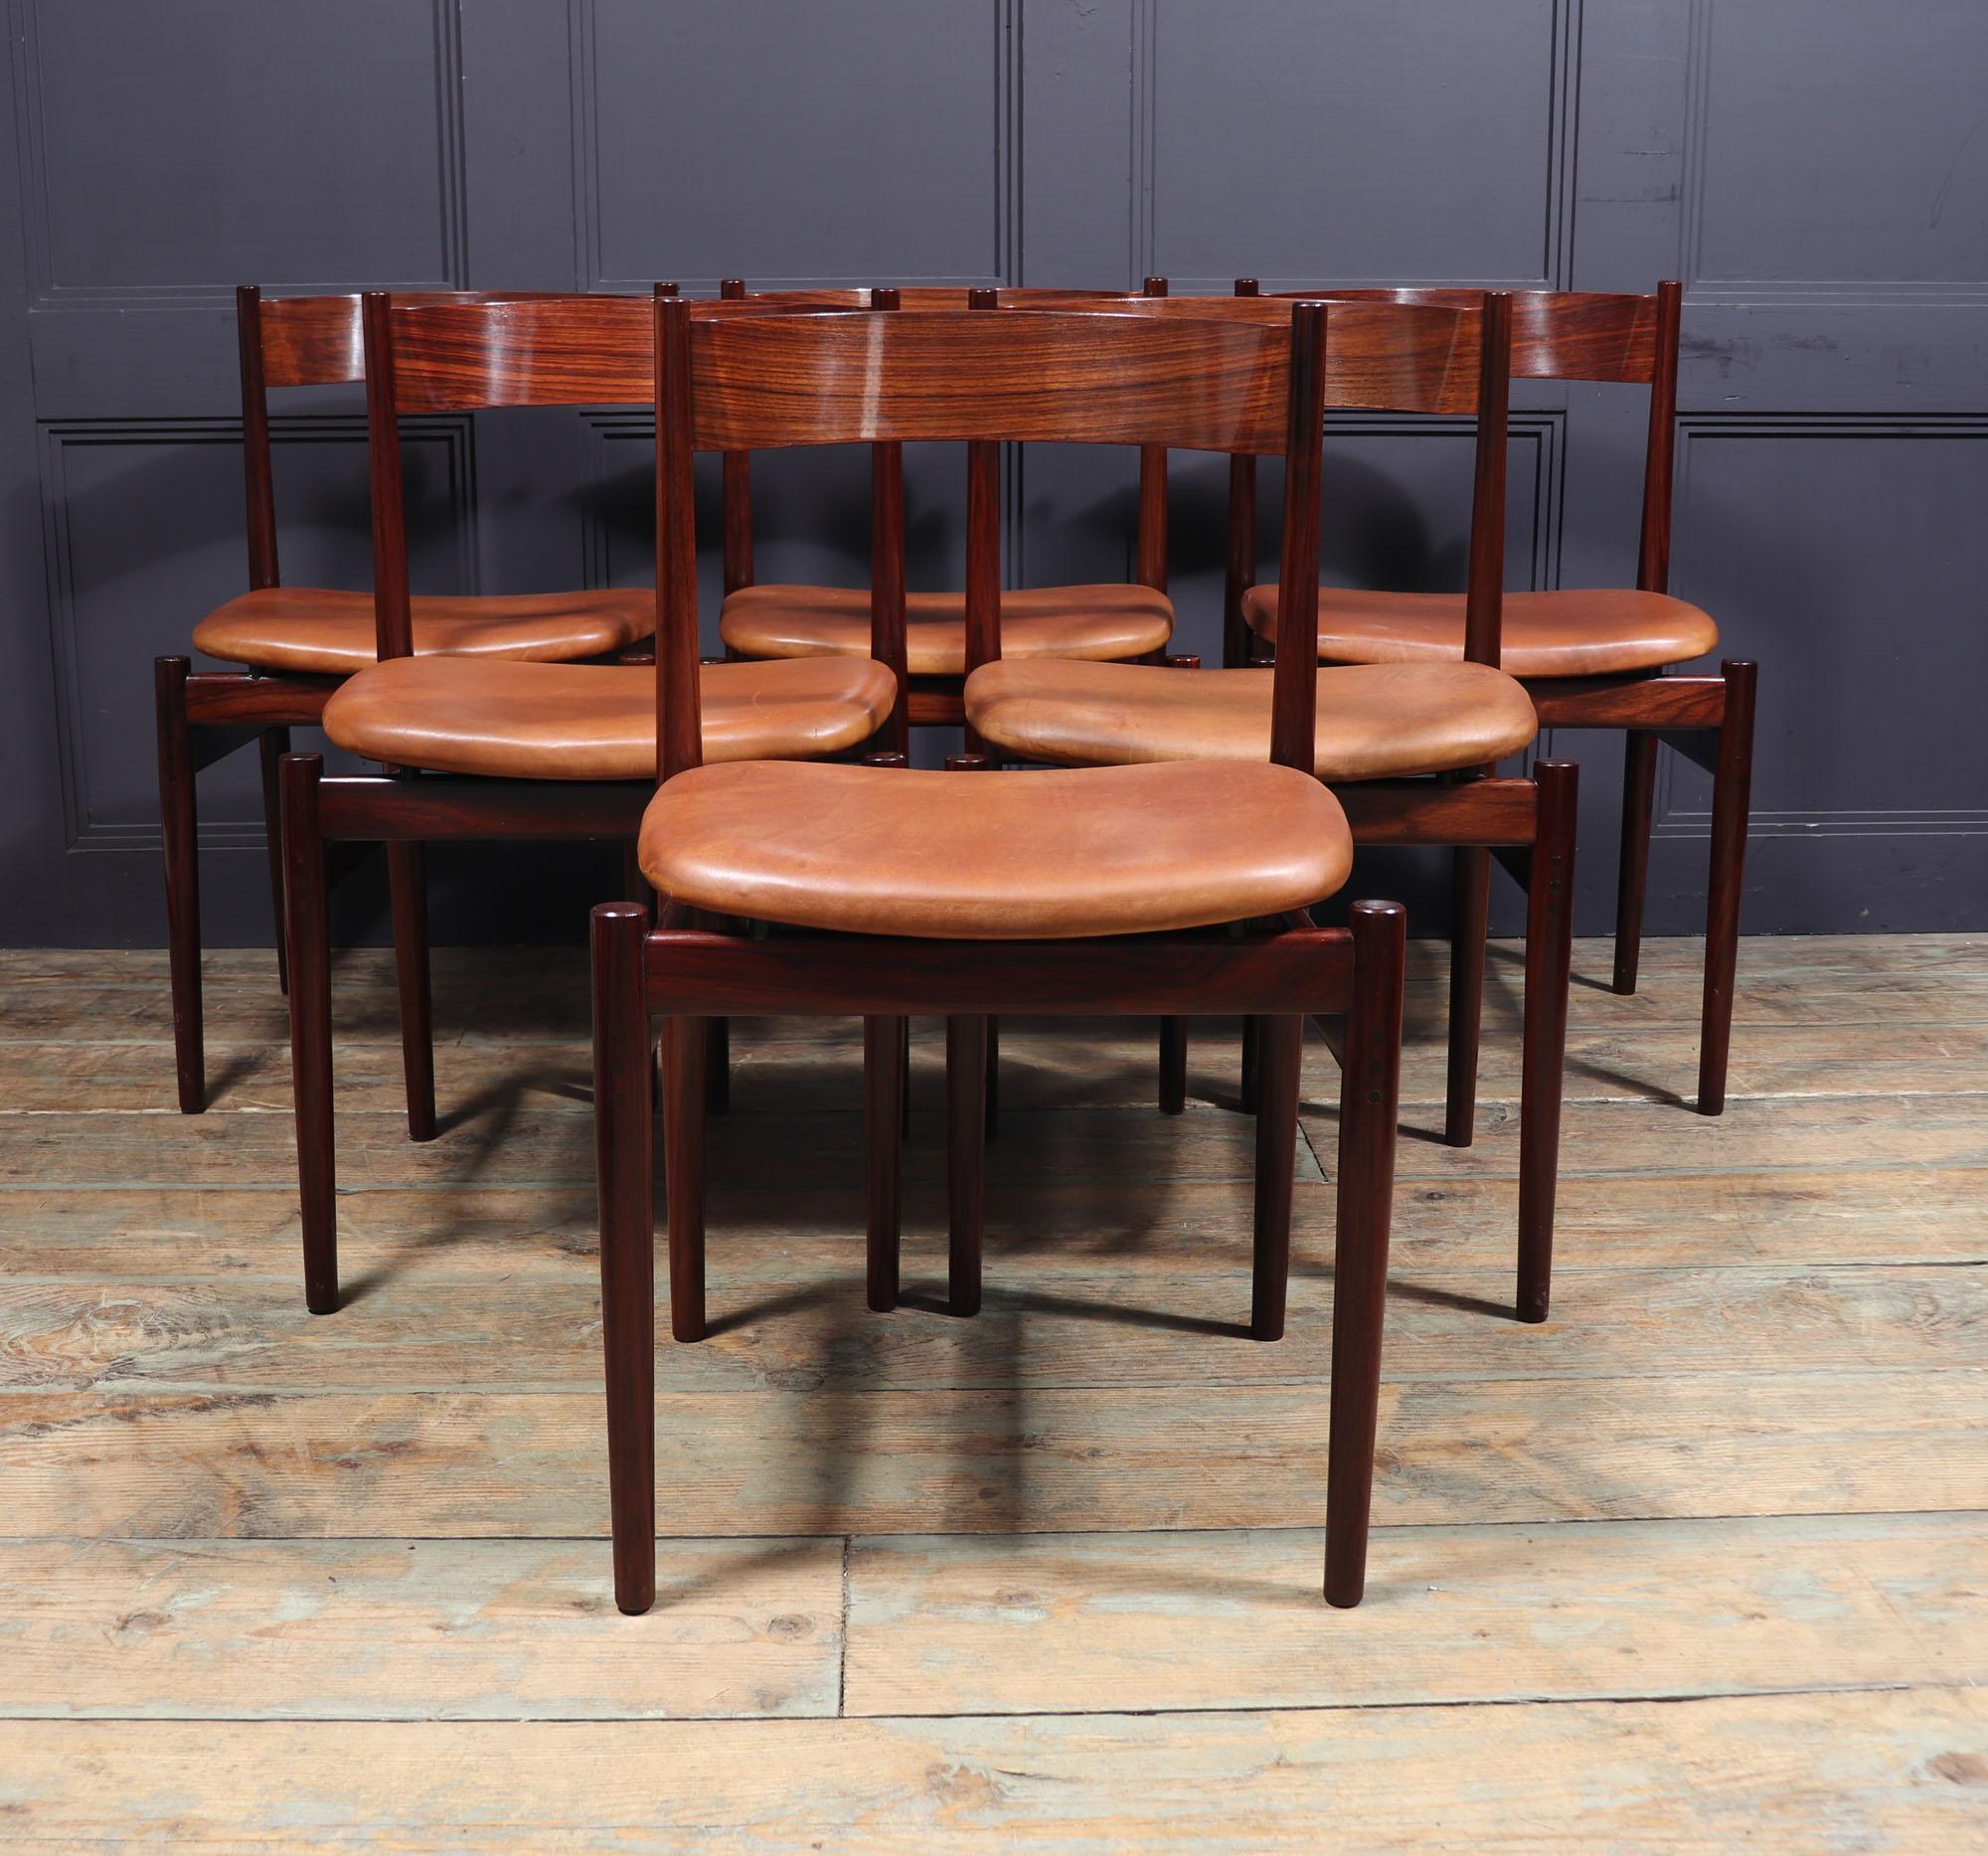 If you’re looking to add a classic Italian accent to your dining area, the Set of Six Italian Rosewood model 101 Dining Chairs produced by Cassina is the perfect choice. Crafted from rosewood and featuring turned legs, with triple doweled joints,